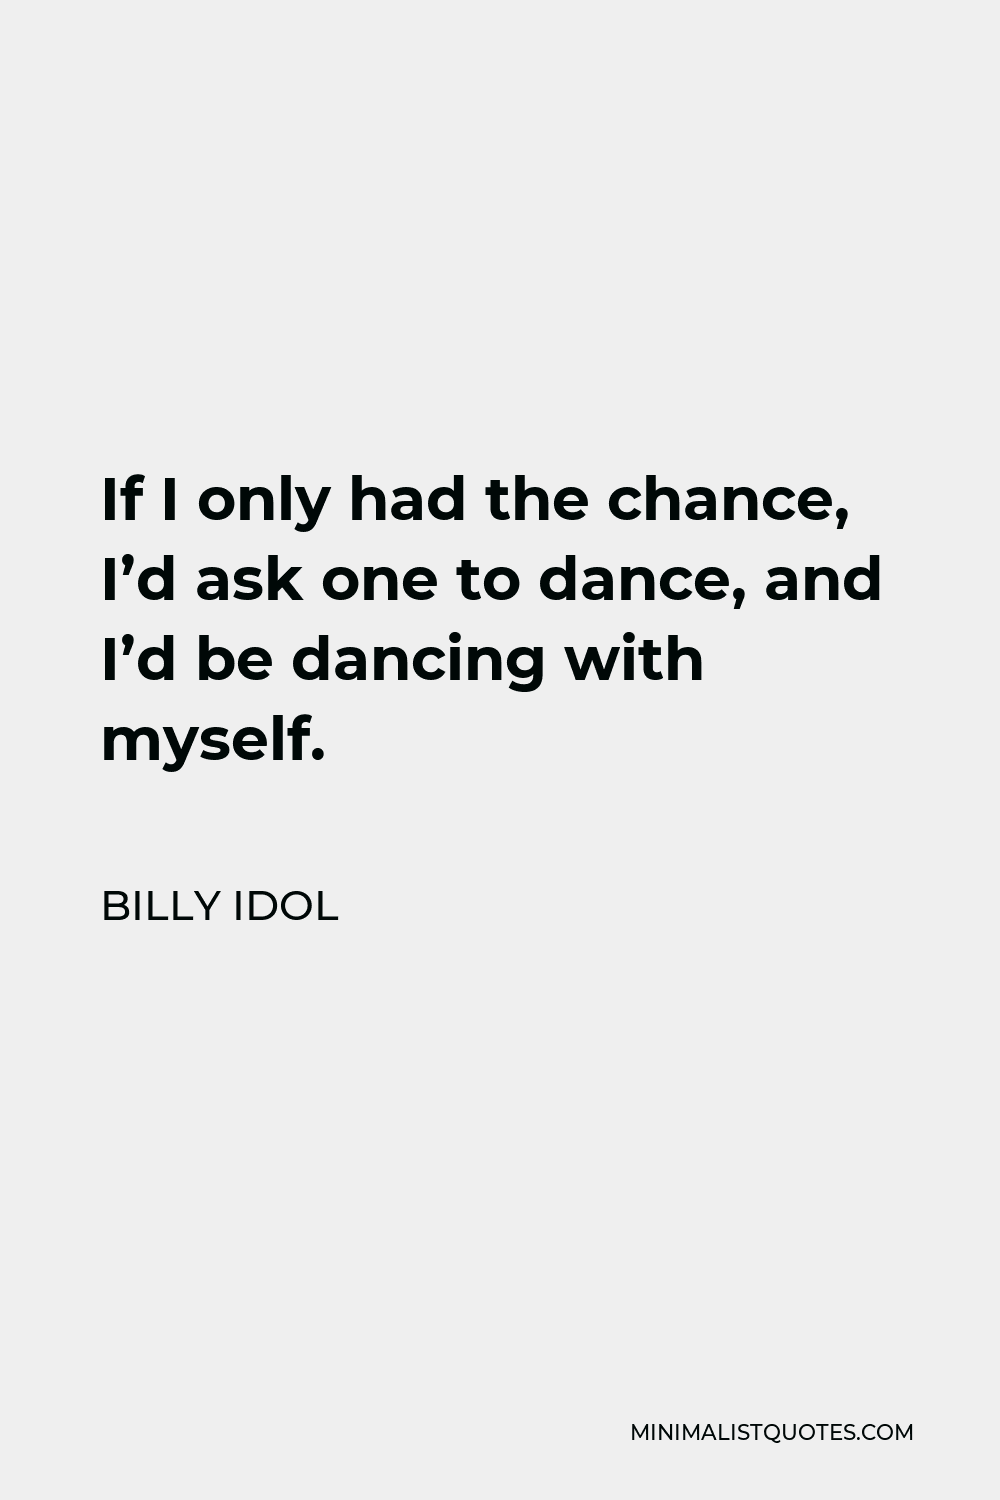 Billy Idol Quote - If I only had the chance, I’d ask one to dance, and I’d be dancing with myself.